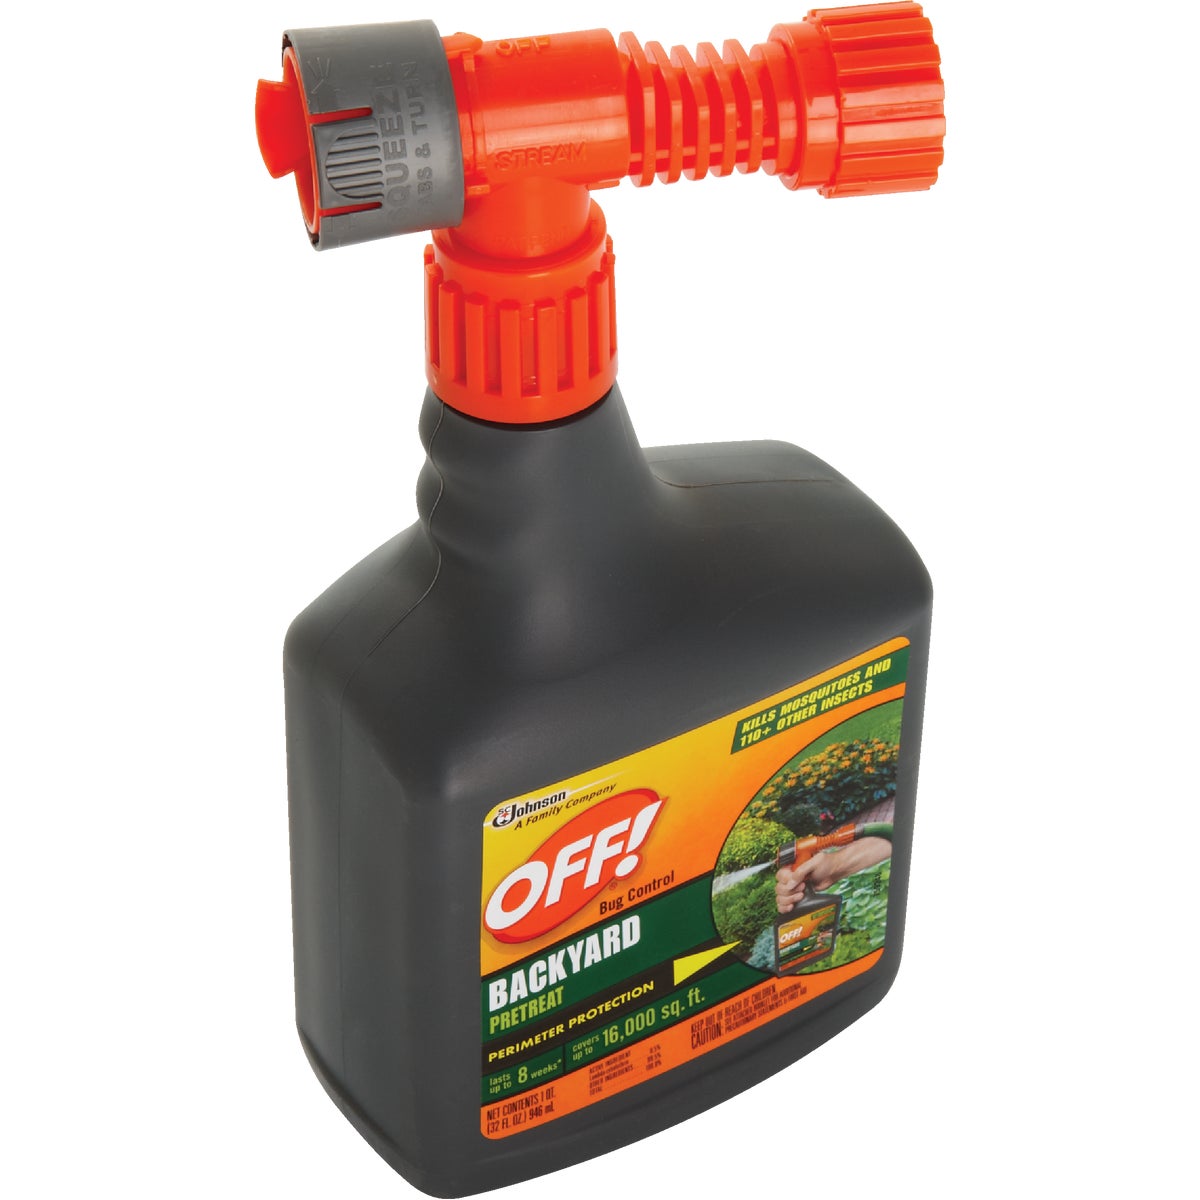 Item 710136, OFF! Bug Control Backyard Pre-Treat is a concentrate that, when attached to